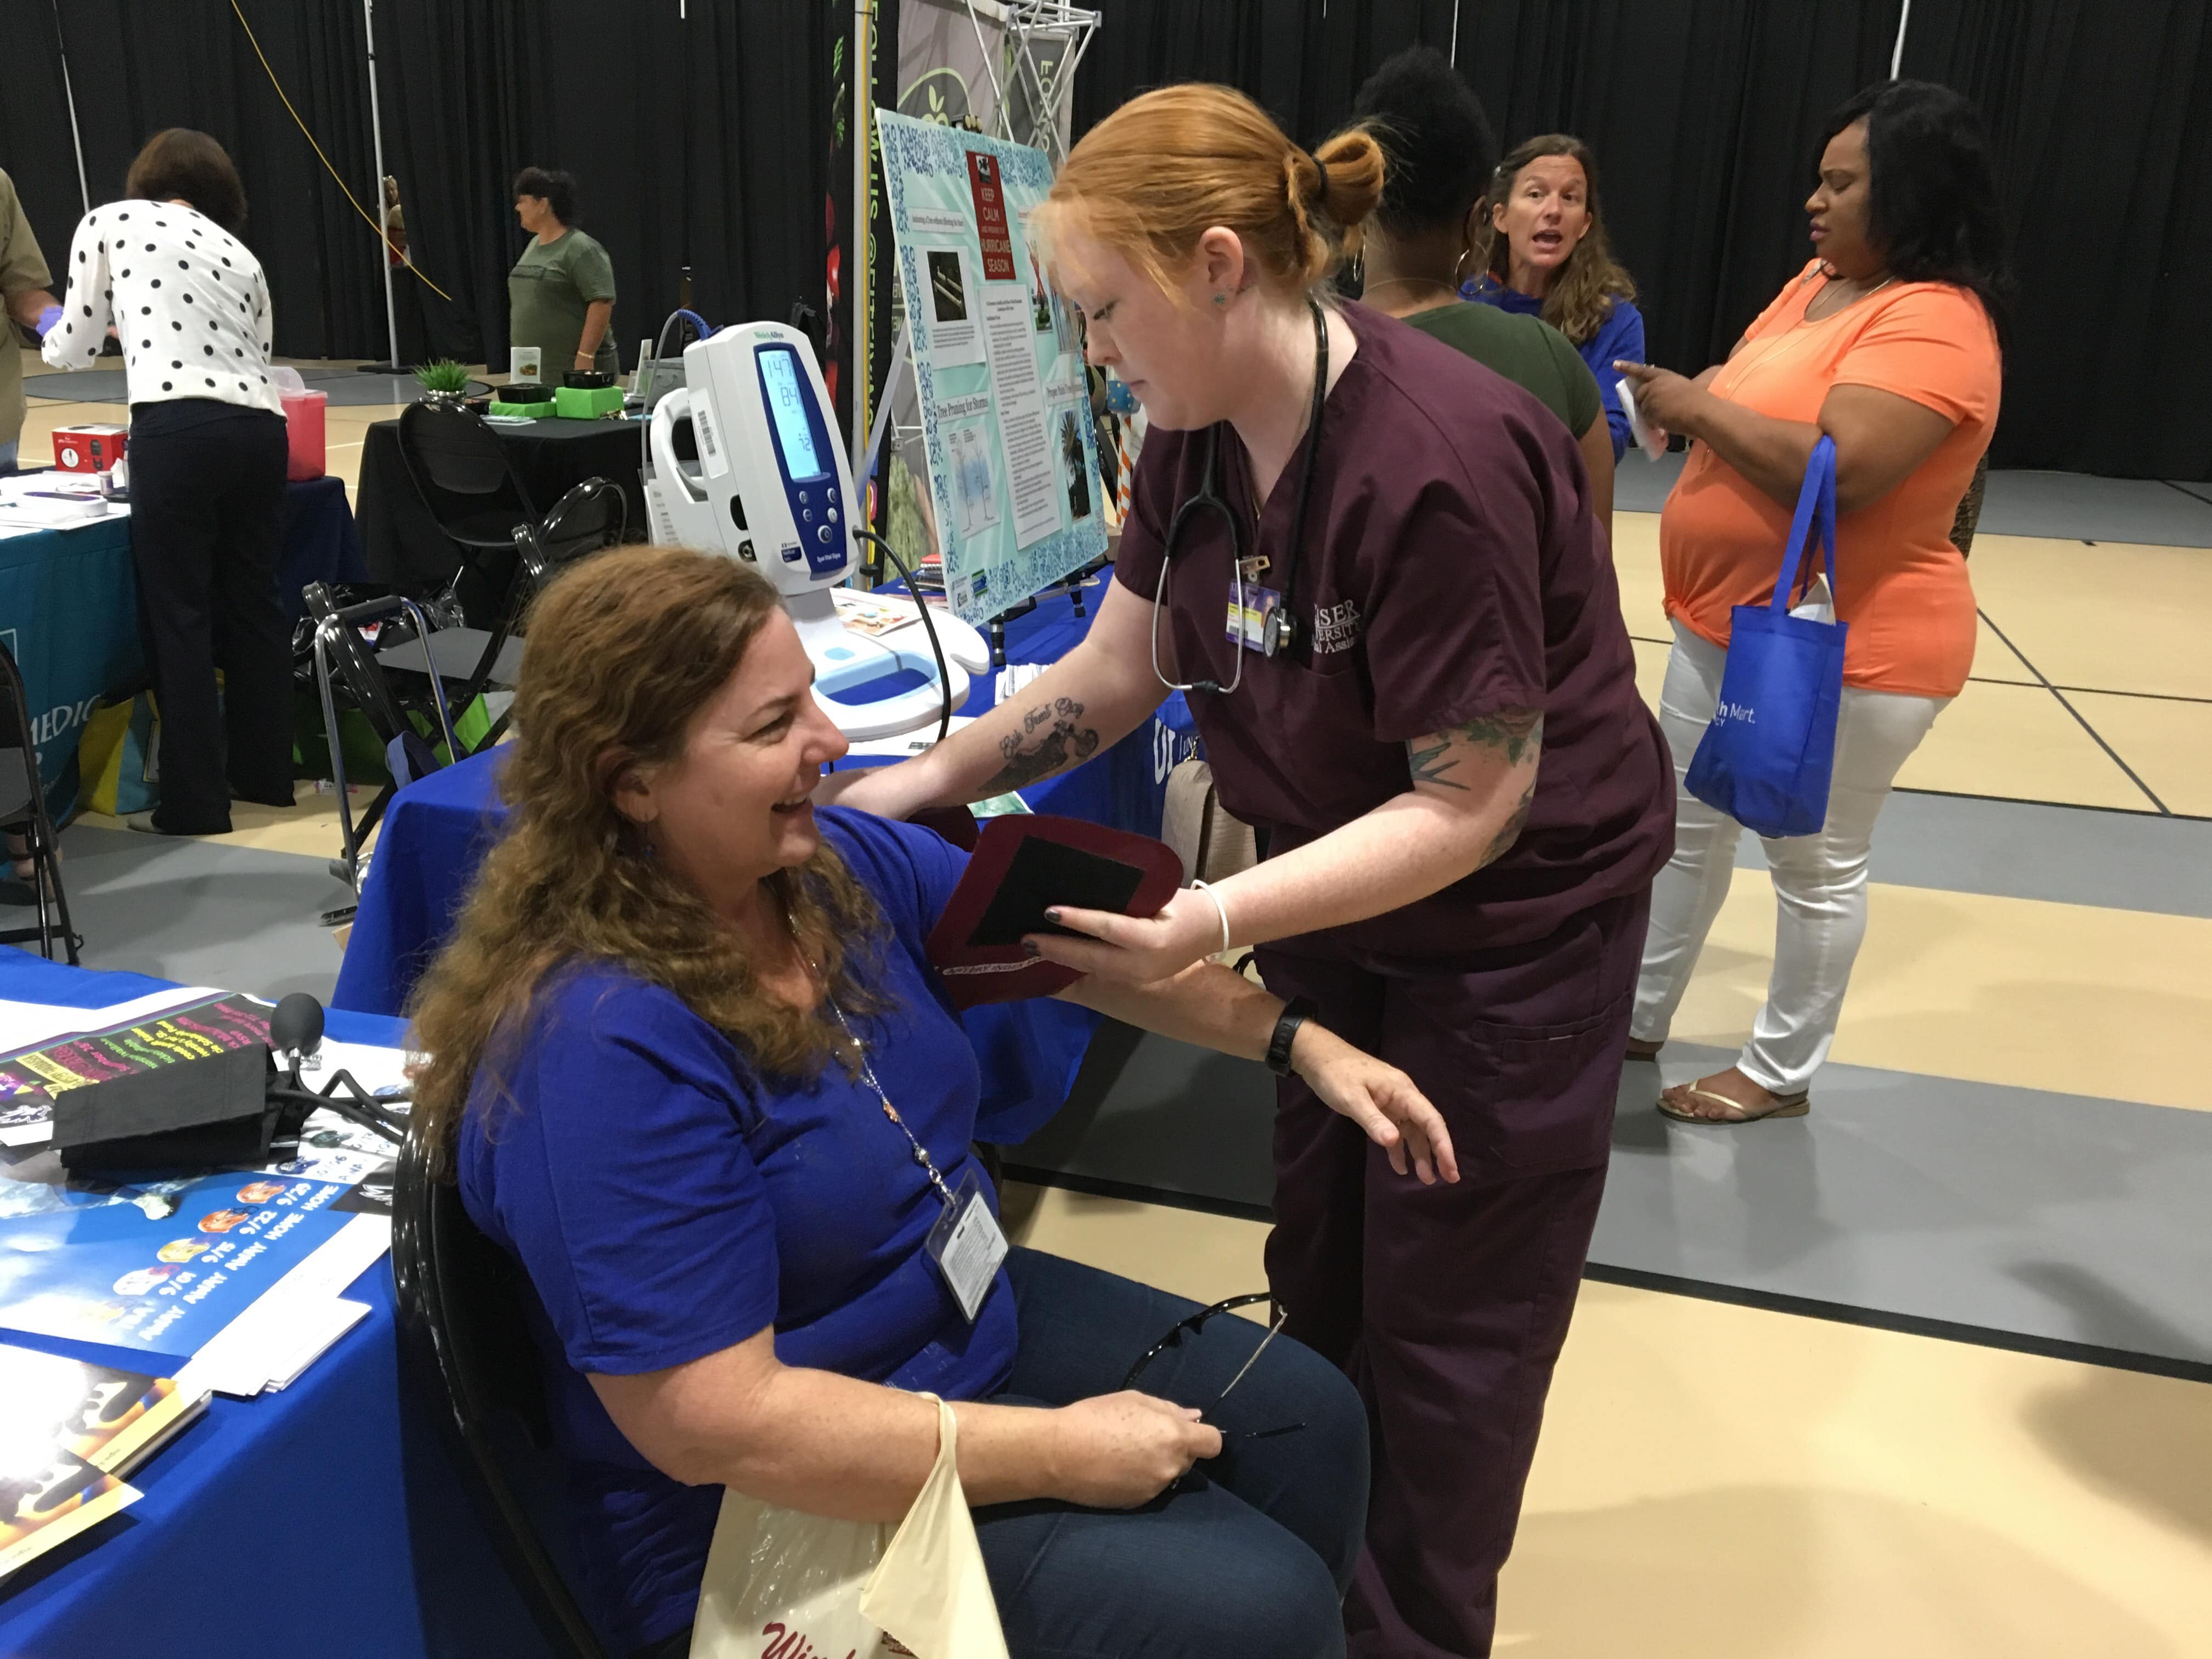 KU Port St. Lucie Campus Students Participate in Health and Benefits Fair